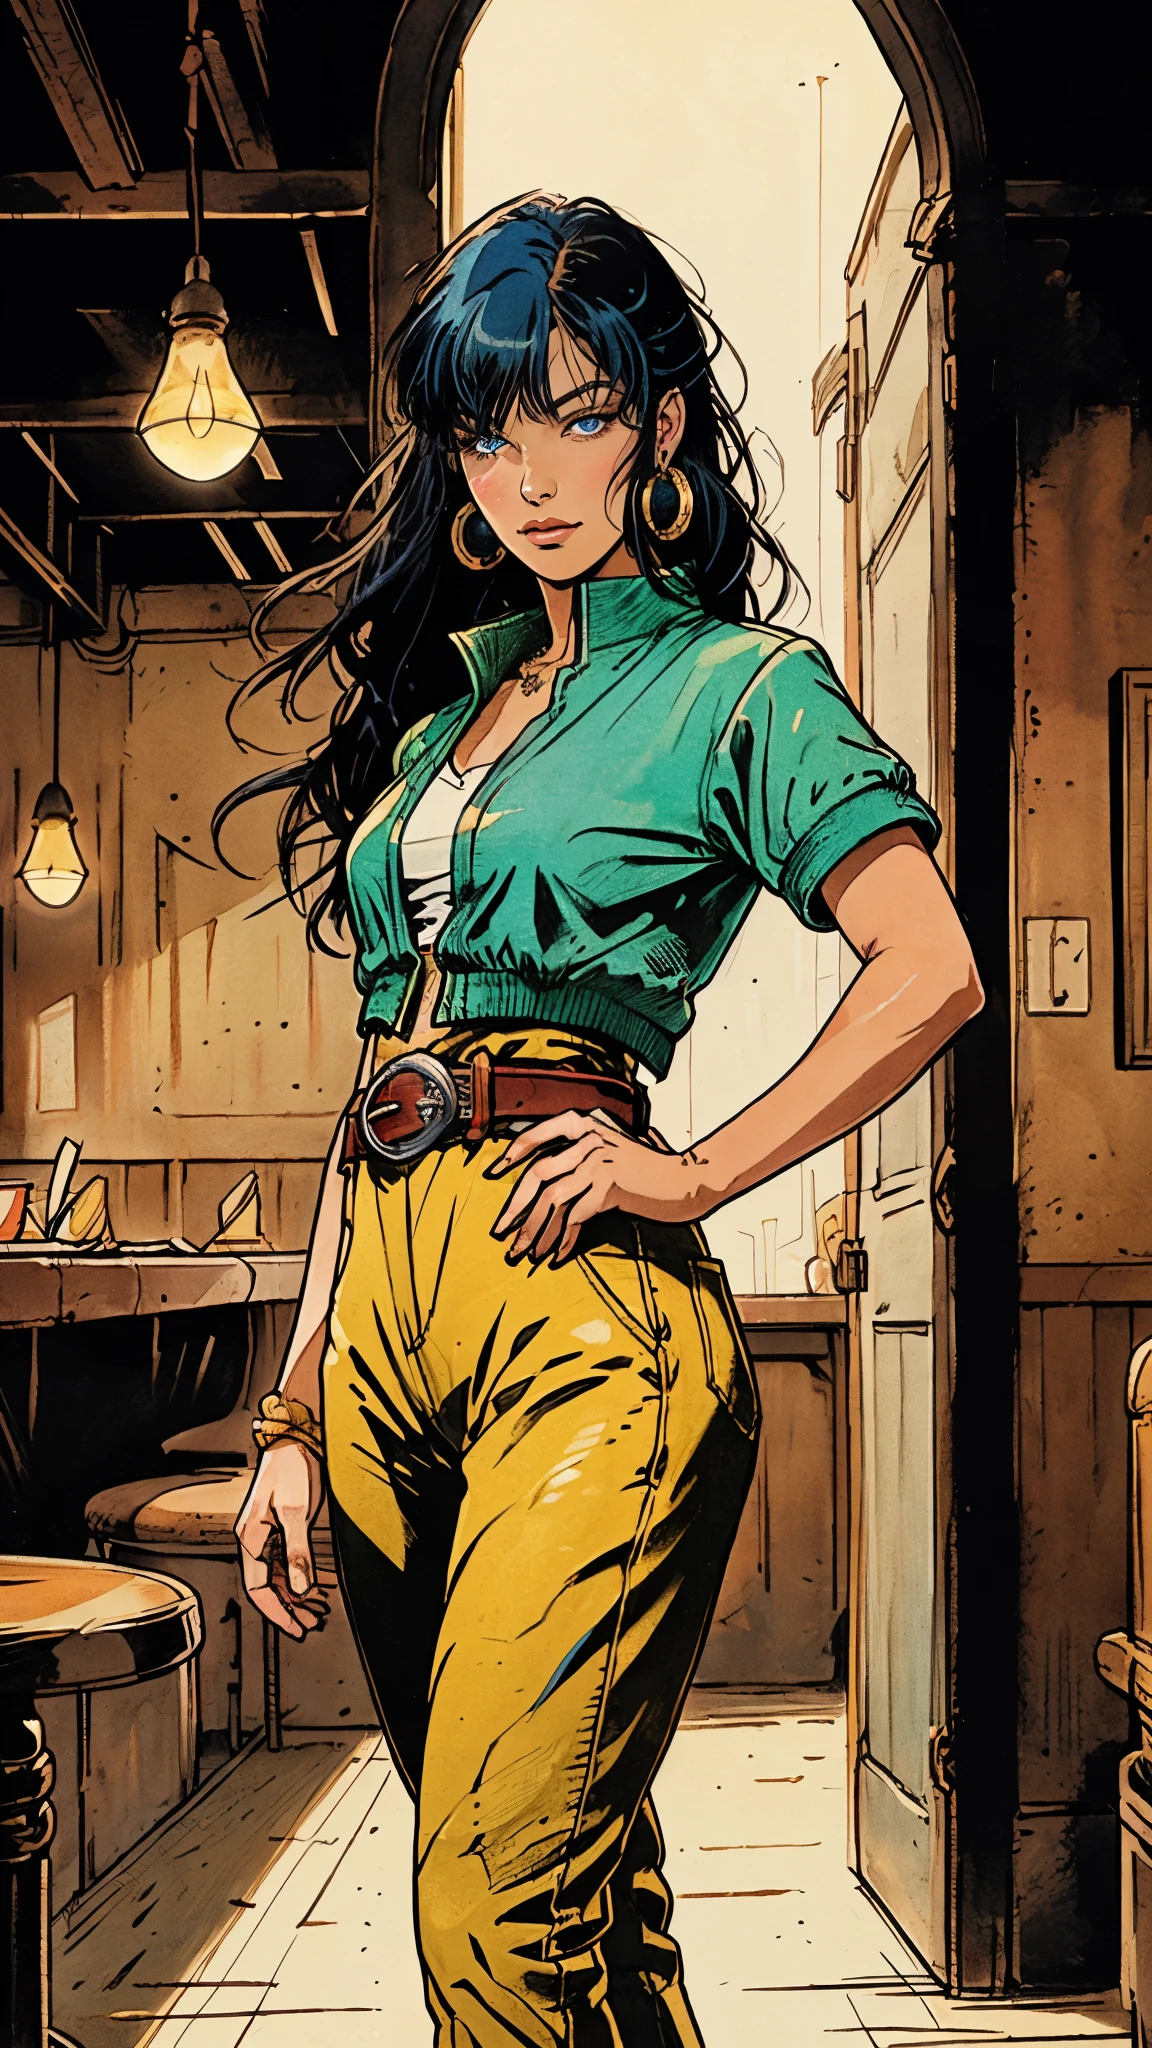 ((A young woman with flowing long dark blue hair, long side part bangs covering the right side of her face, sharp upward-arched thick eyebrows, large expressive eyes, a delicate oval face, a sensual wide mouth, a mocking expression, a fantasy martial arts-style emerald green short jacket with a blue undershirt, a high collar, rolled-up sleeves, matching fabric pants, a yellow waist belt, leather combat boots, one hand rests on her hip, surrounded by a cyan energy aura, standing in a fantasy style Chinese tavern)), this character embodies a finely crafted a fantasy martial arts heroine in anime style, exquisite and mature manga art style, pale skin, high definition, best quality, highres, ultra-detailed, ultra-fine painting, extremely delicate, professional, anatomically correct, symmetrical face, extremely detailed eyes and face, high quality eyes, creativity, RAW photo, UHD, 32k, Natural light, cinematic lighting, masterpiece-anatomy-perfect, masterpiece:1.5
